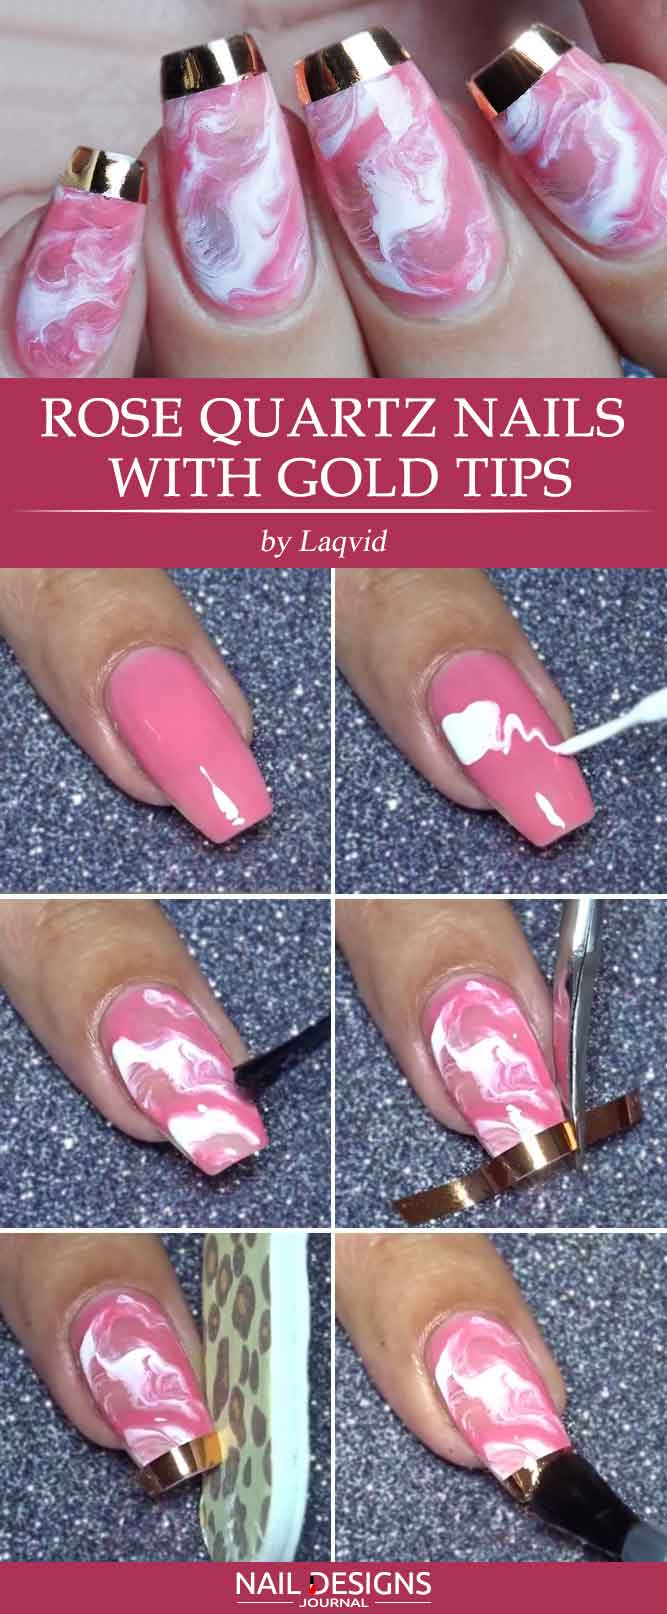 Rose Quartz Nails with Gold Tips